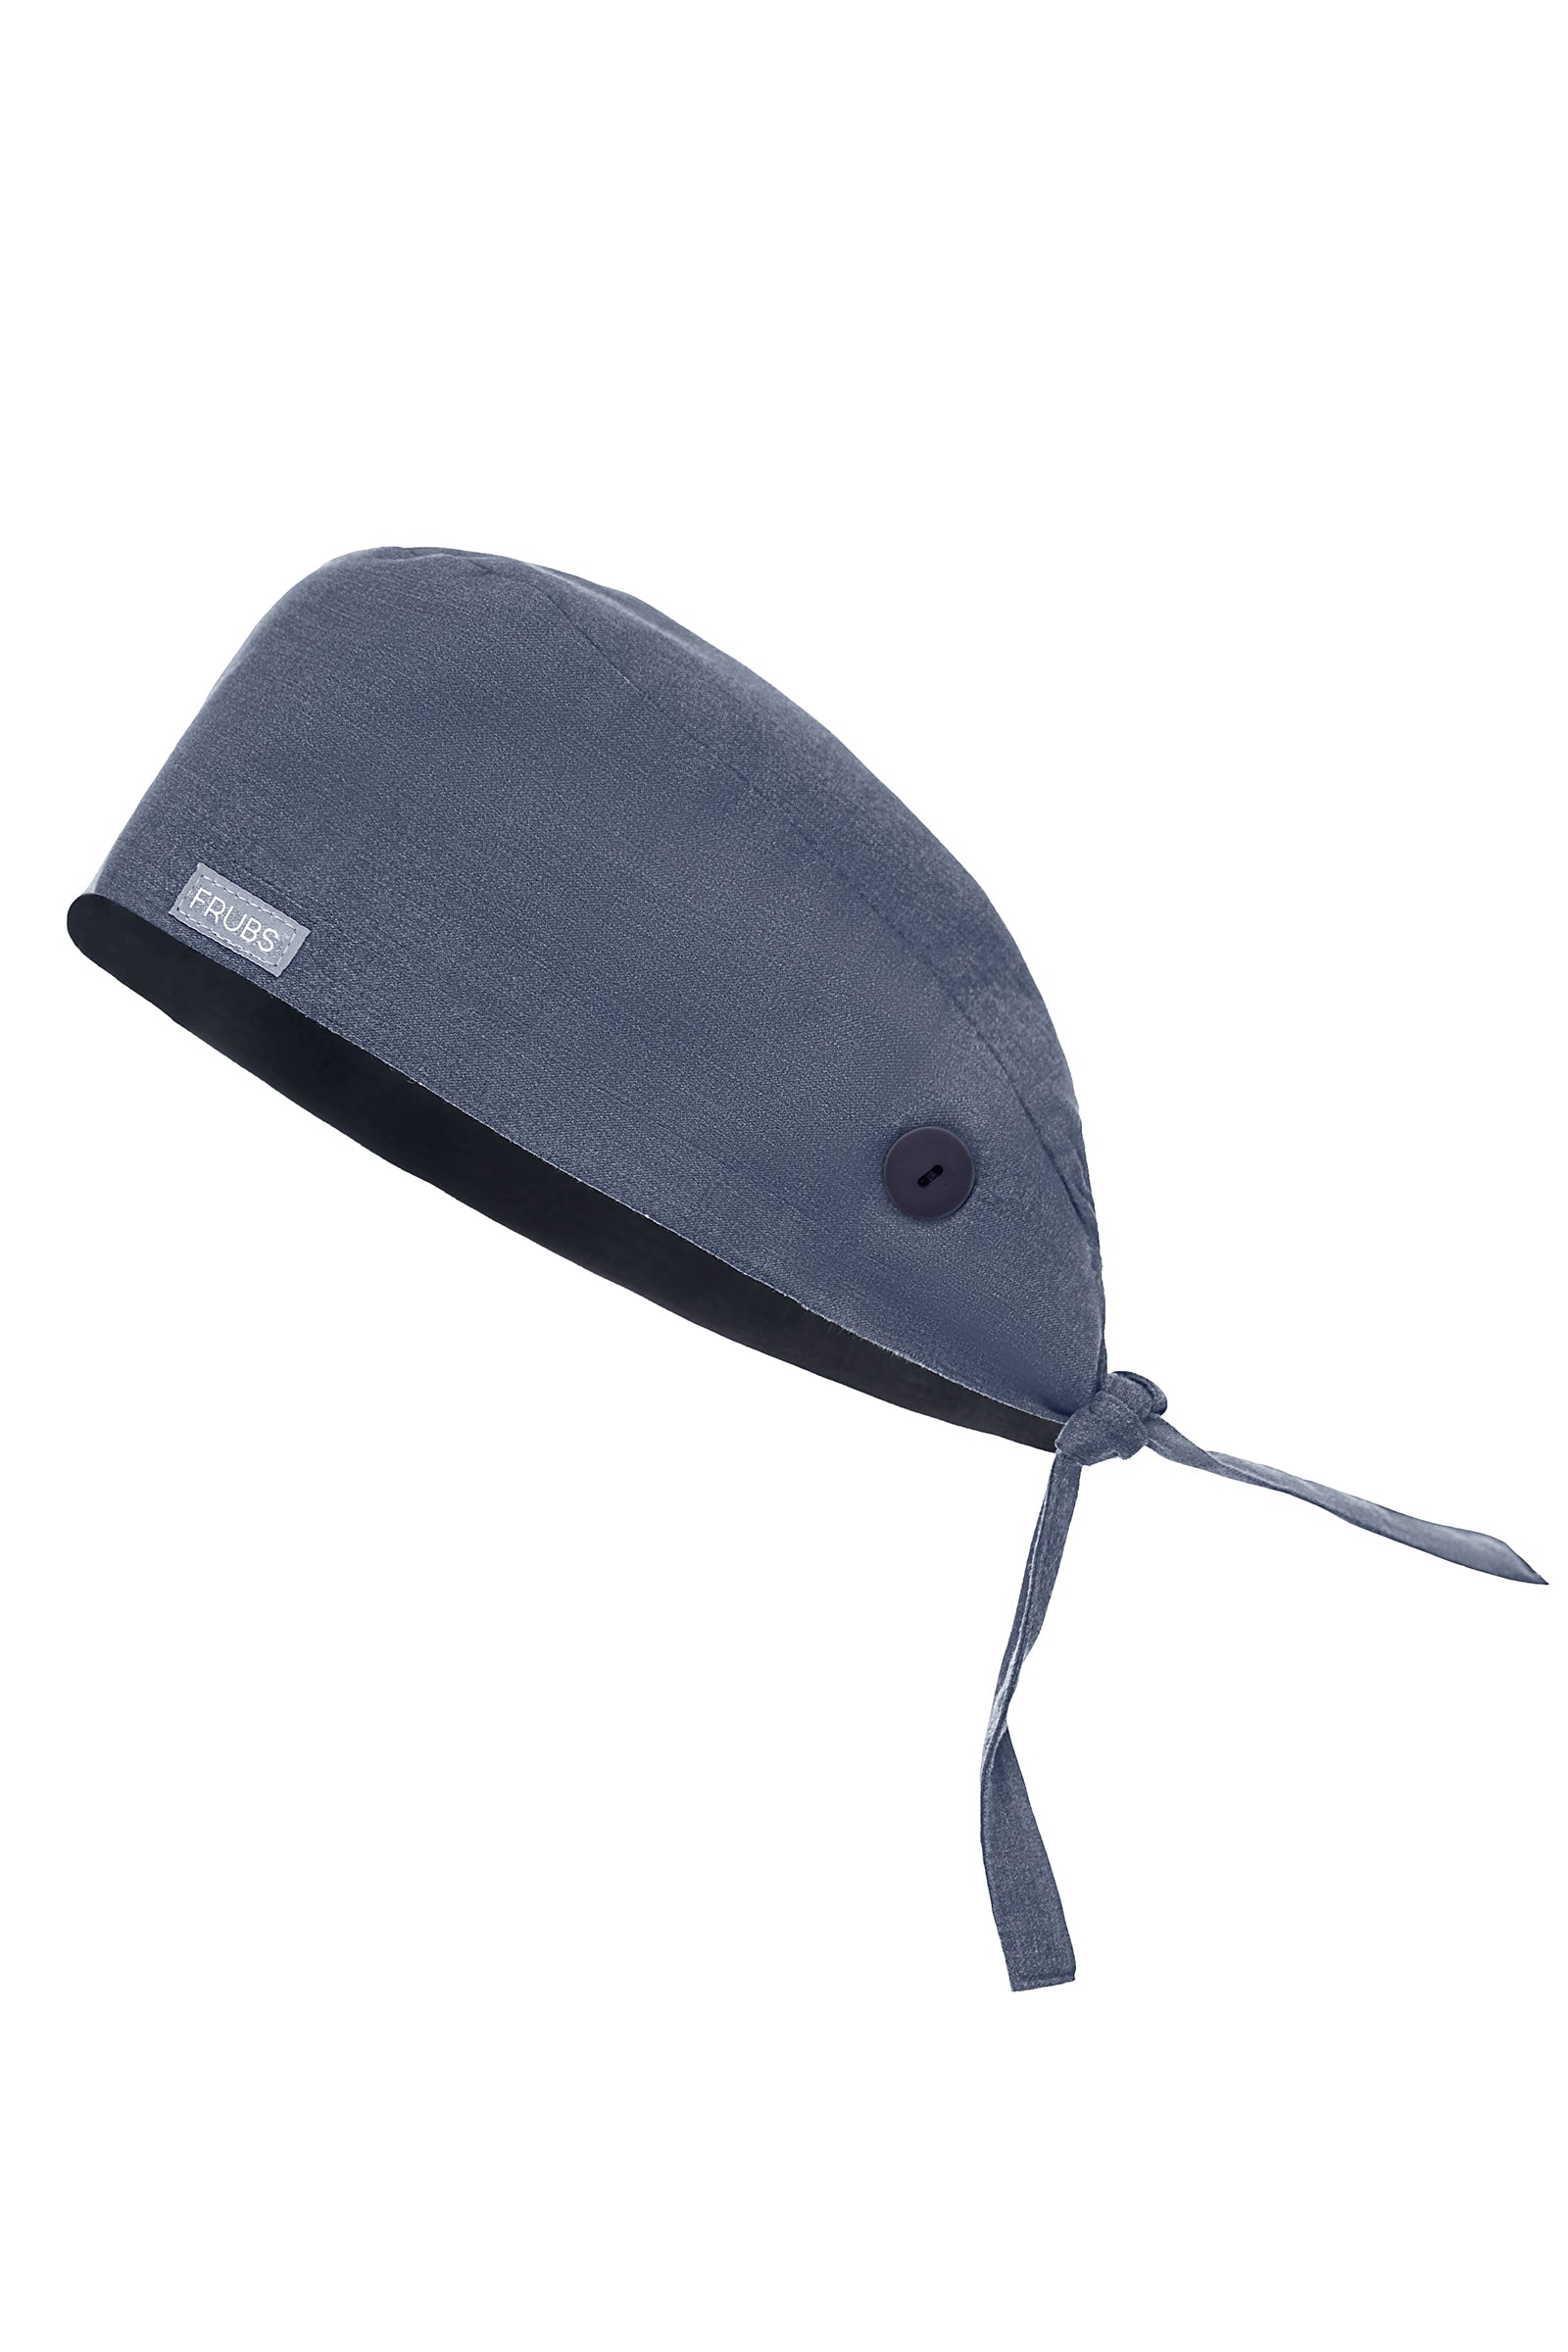 Leatherback Grey surgical caps